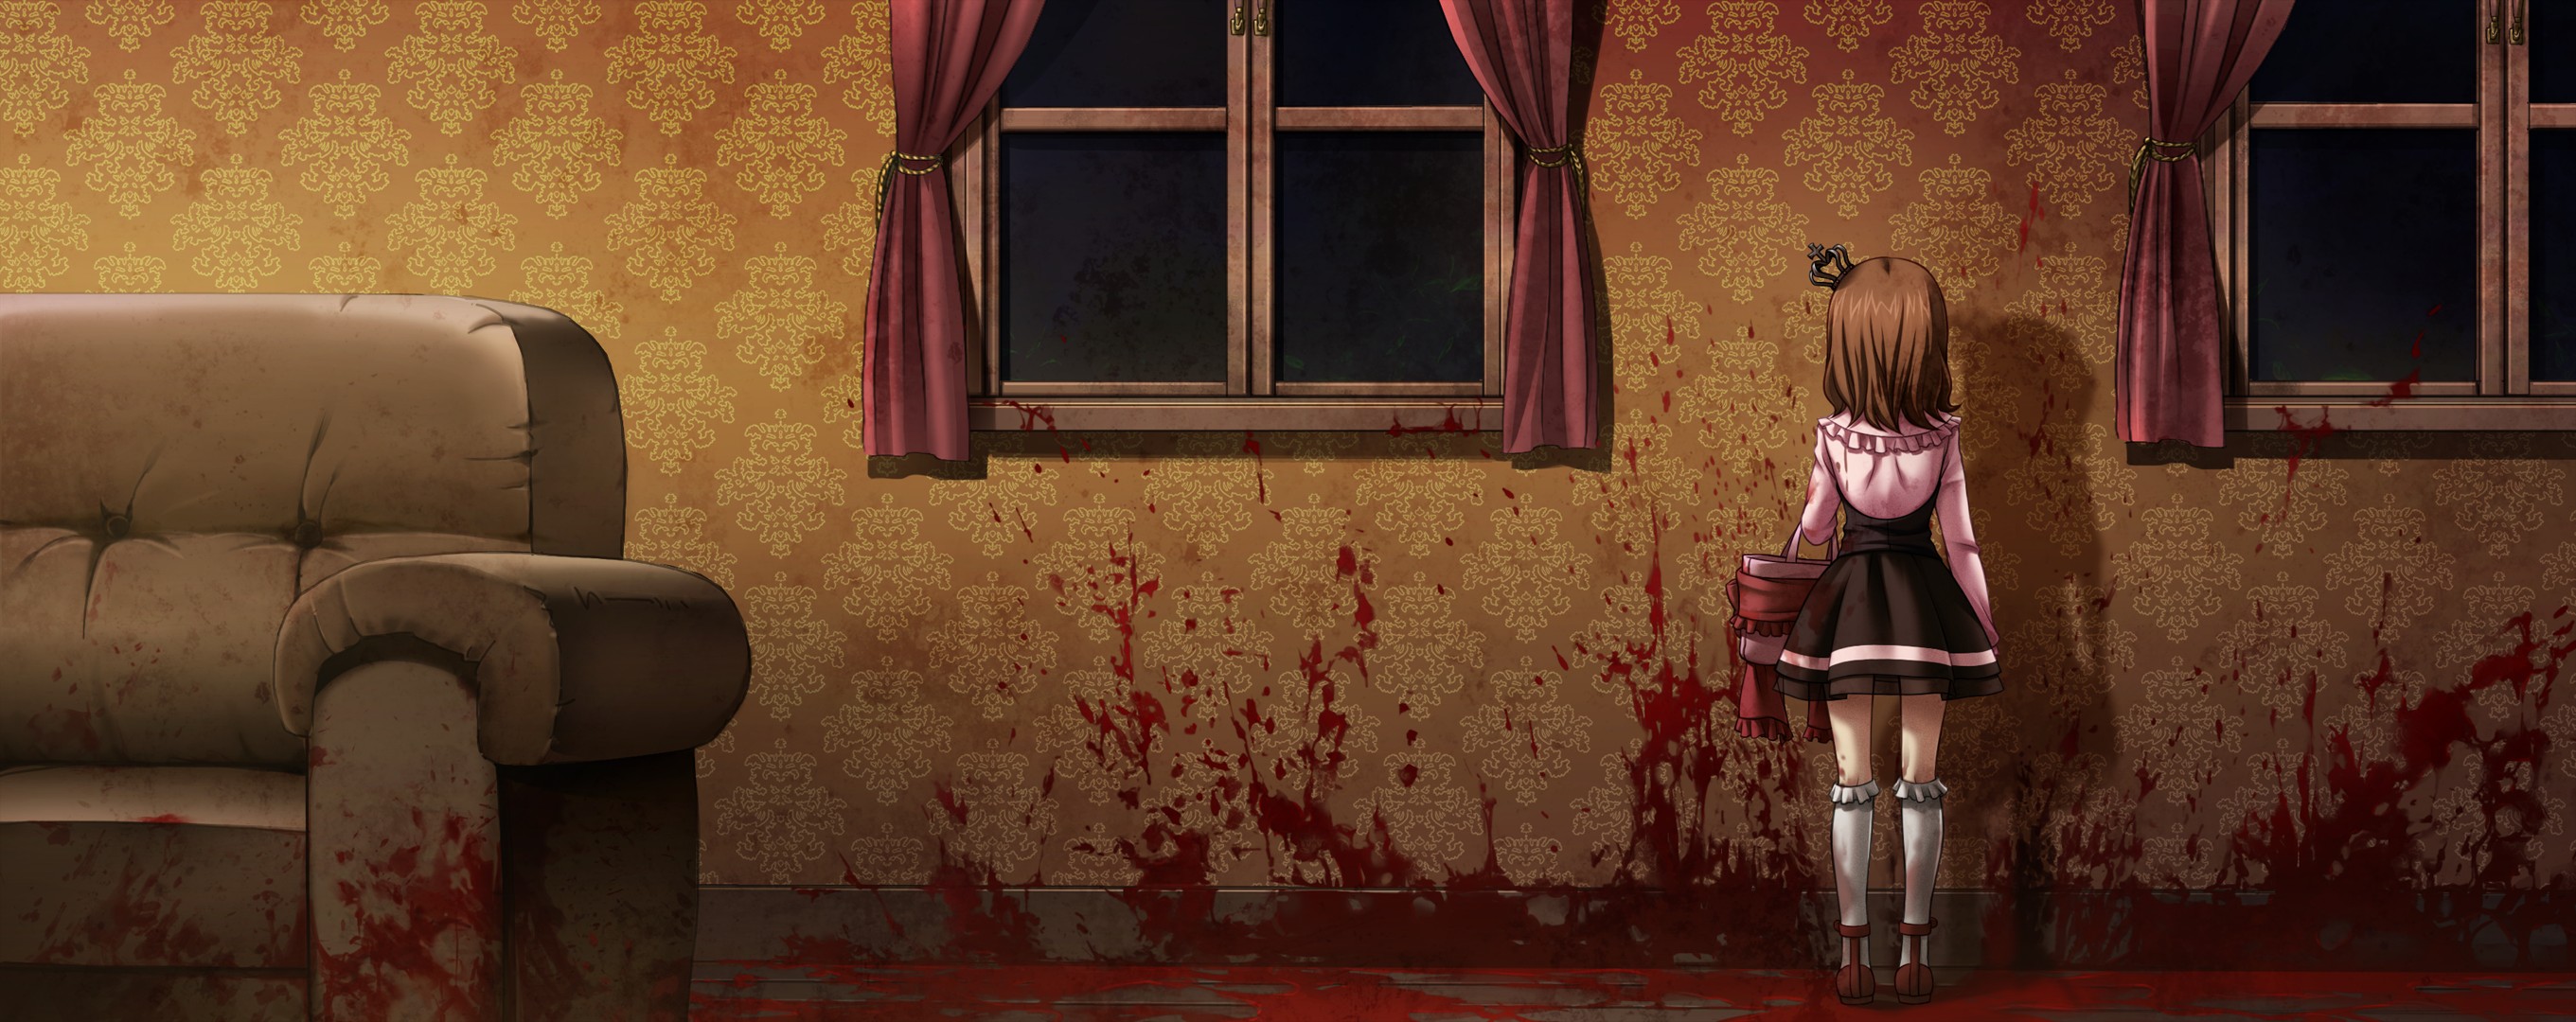 Umineko When They Cry HD Wallpaper Background Image